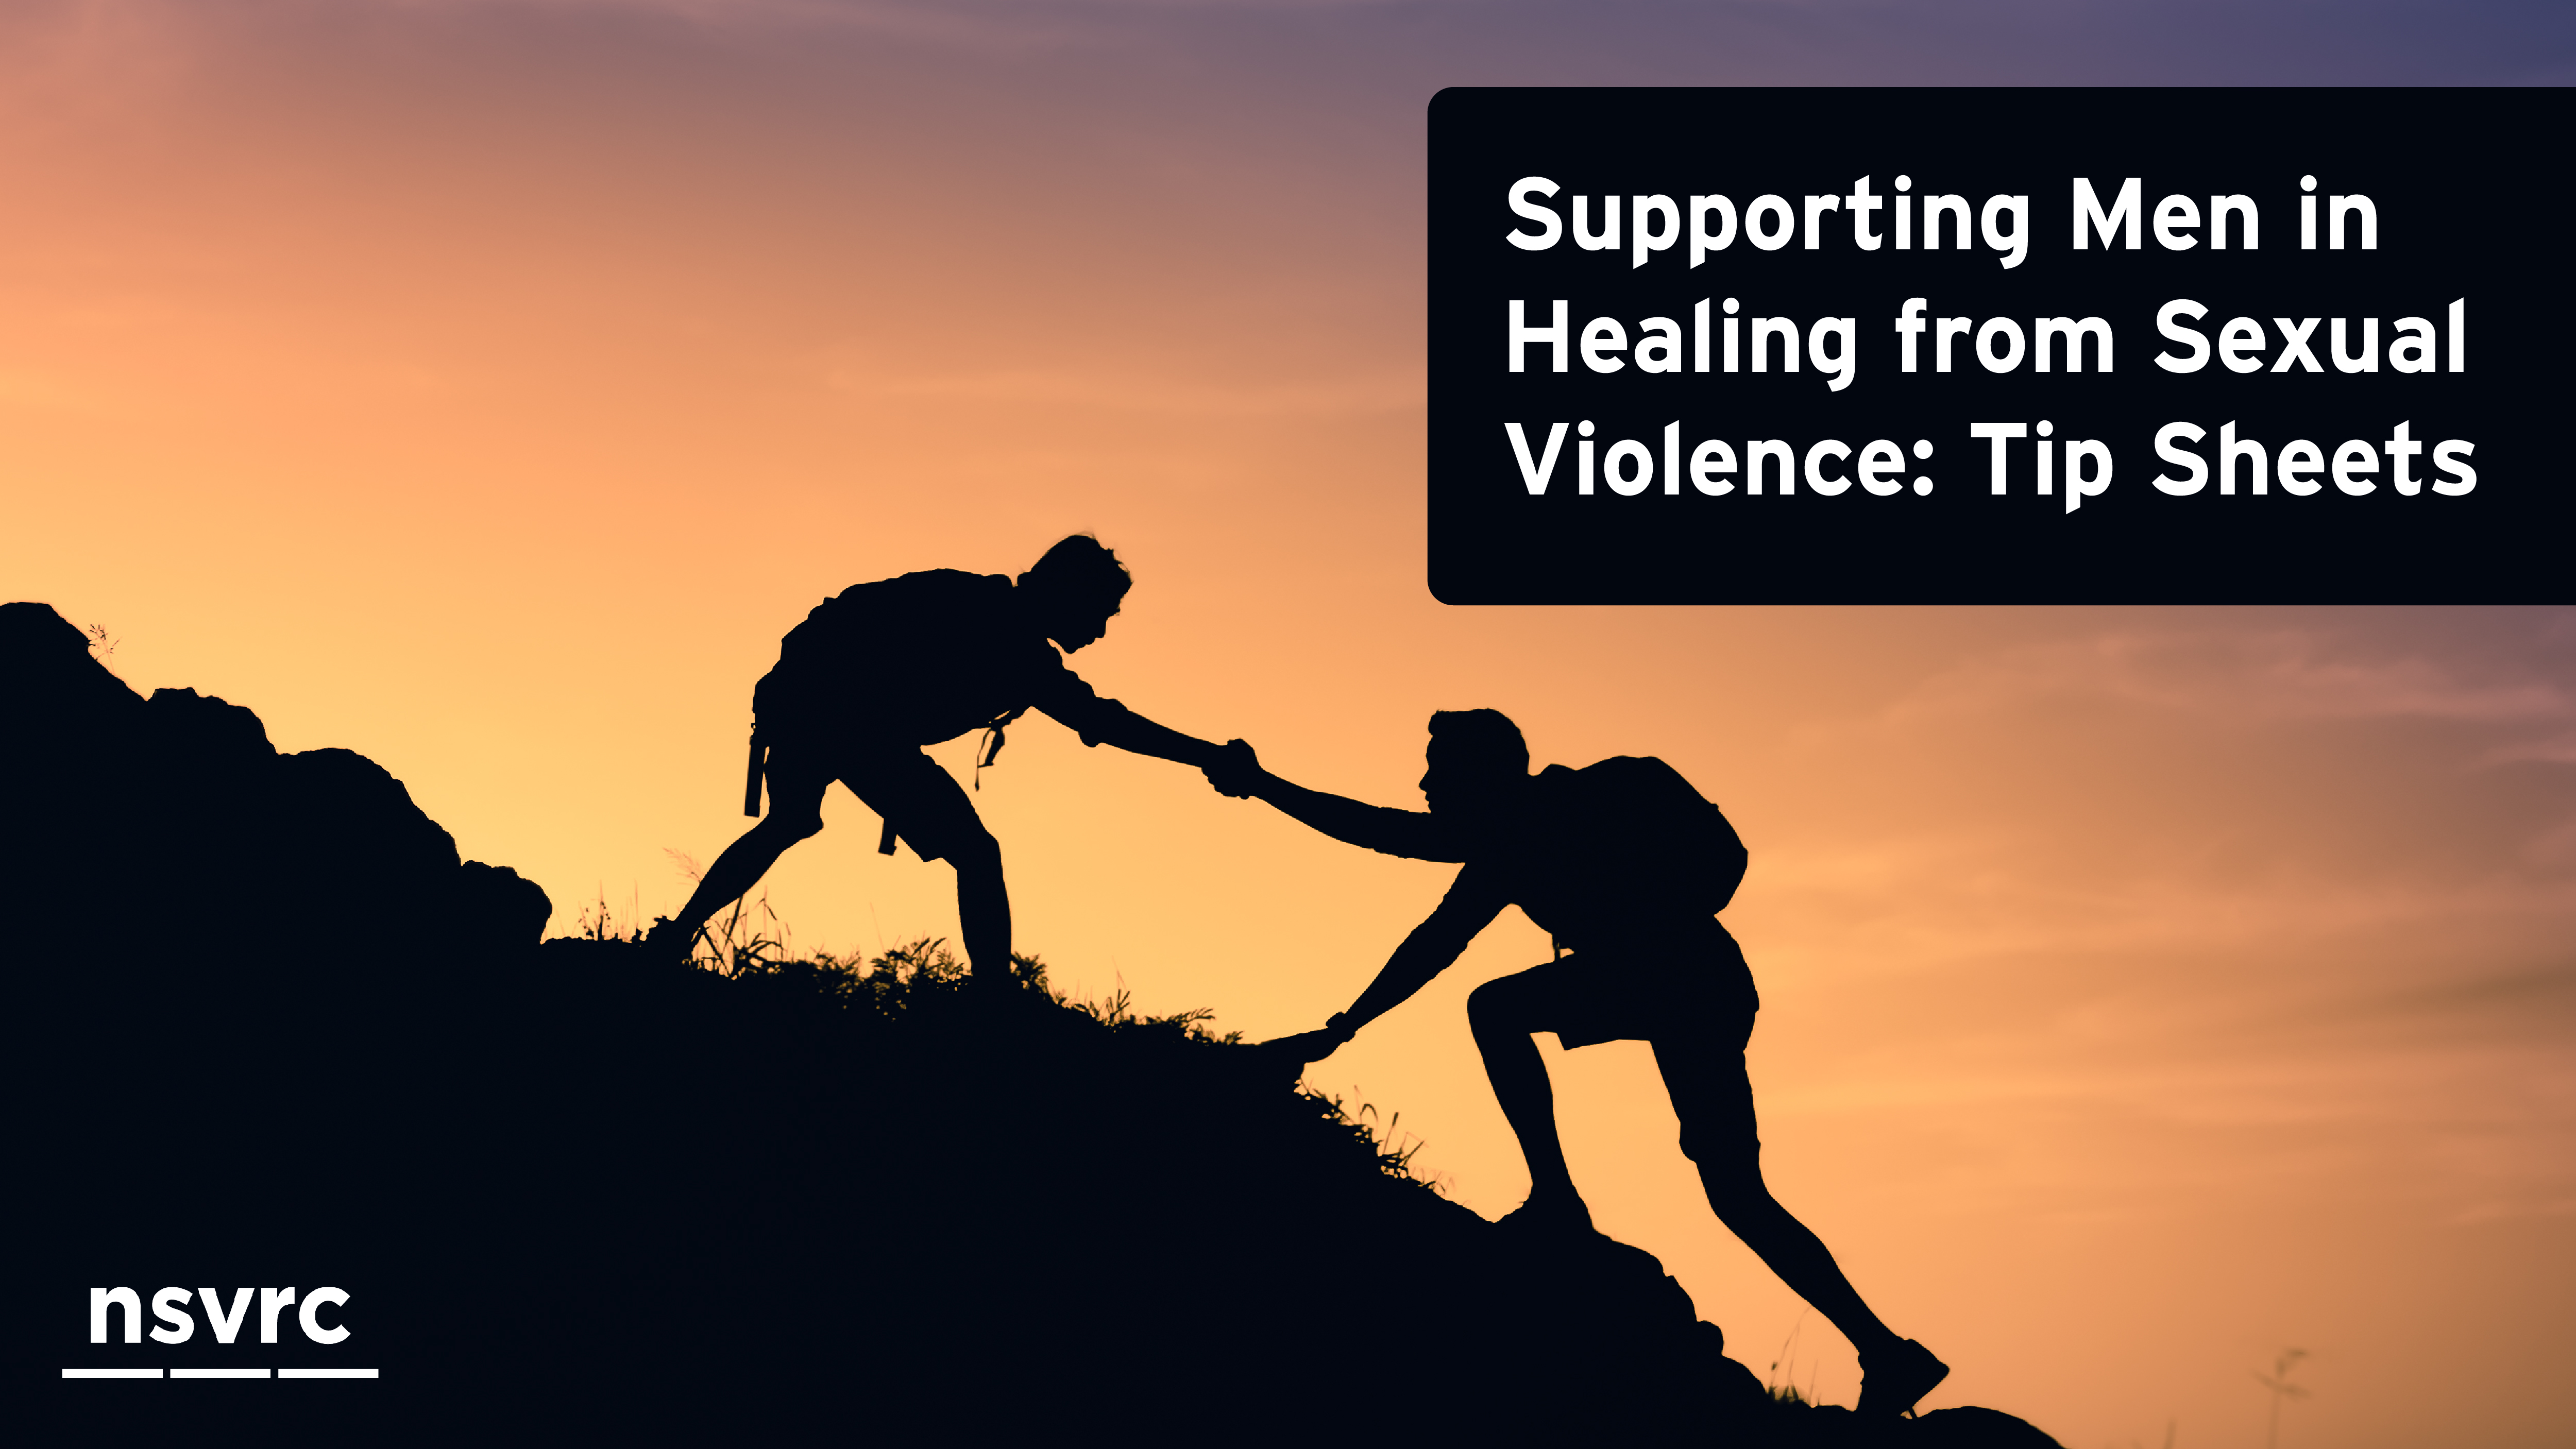 Supporting Men in Healing graphic shows a silhoutte of two climbers, one lending a hand to help pull the other up